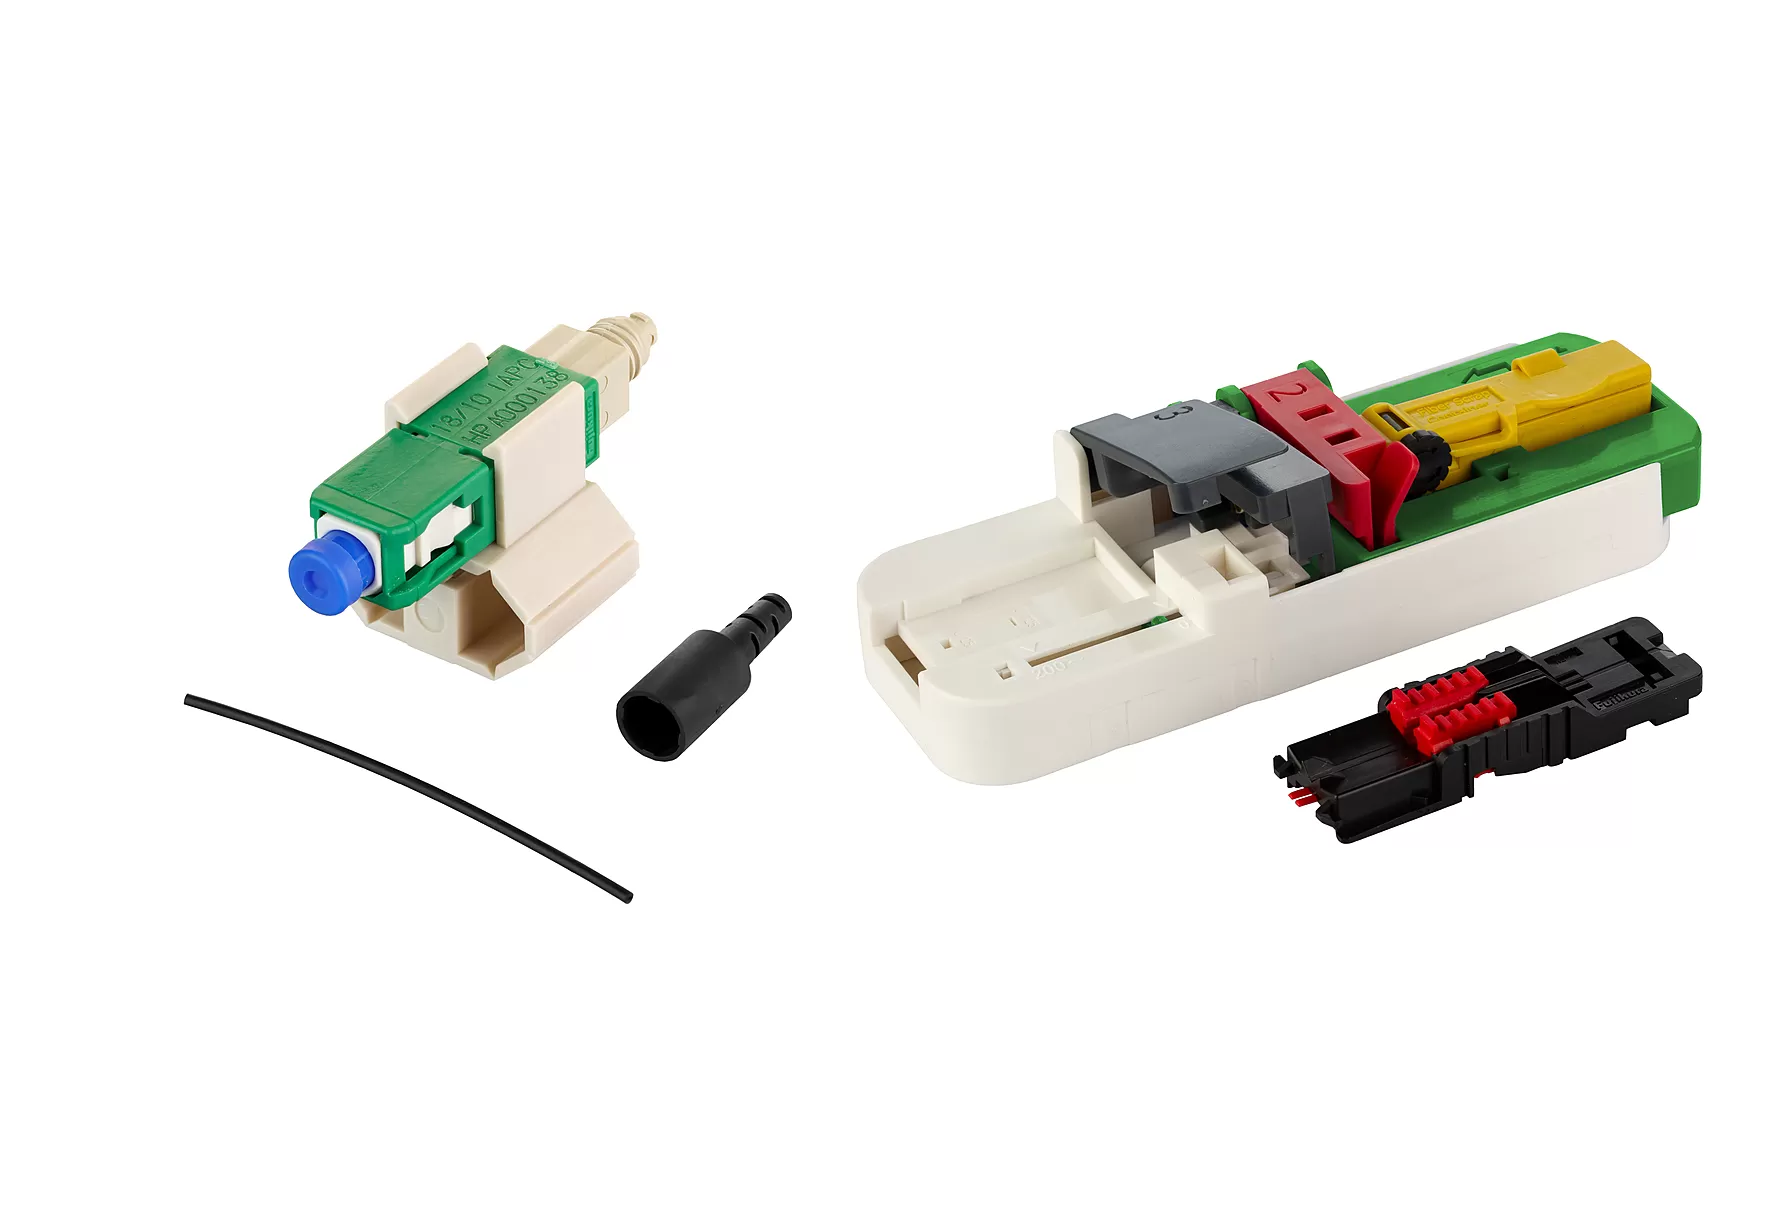 Metz Connect OpDAT FAST Hybrid Steckerbausatz SC APC OS2 100 Stück für Adern Ø 0,25 + 0,9 mm inkl. Cleaver-Set und Faser-Guide 1509QAEA010C-E